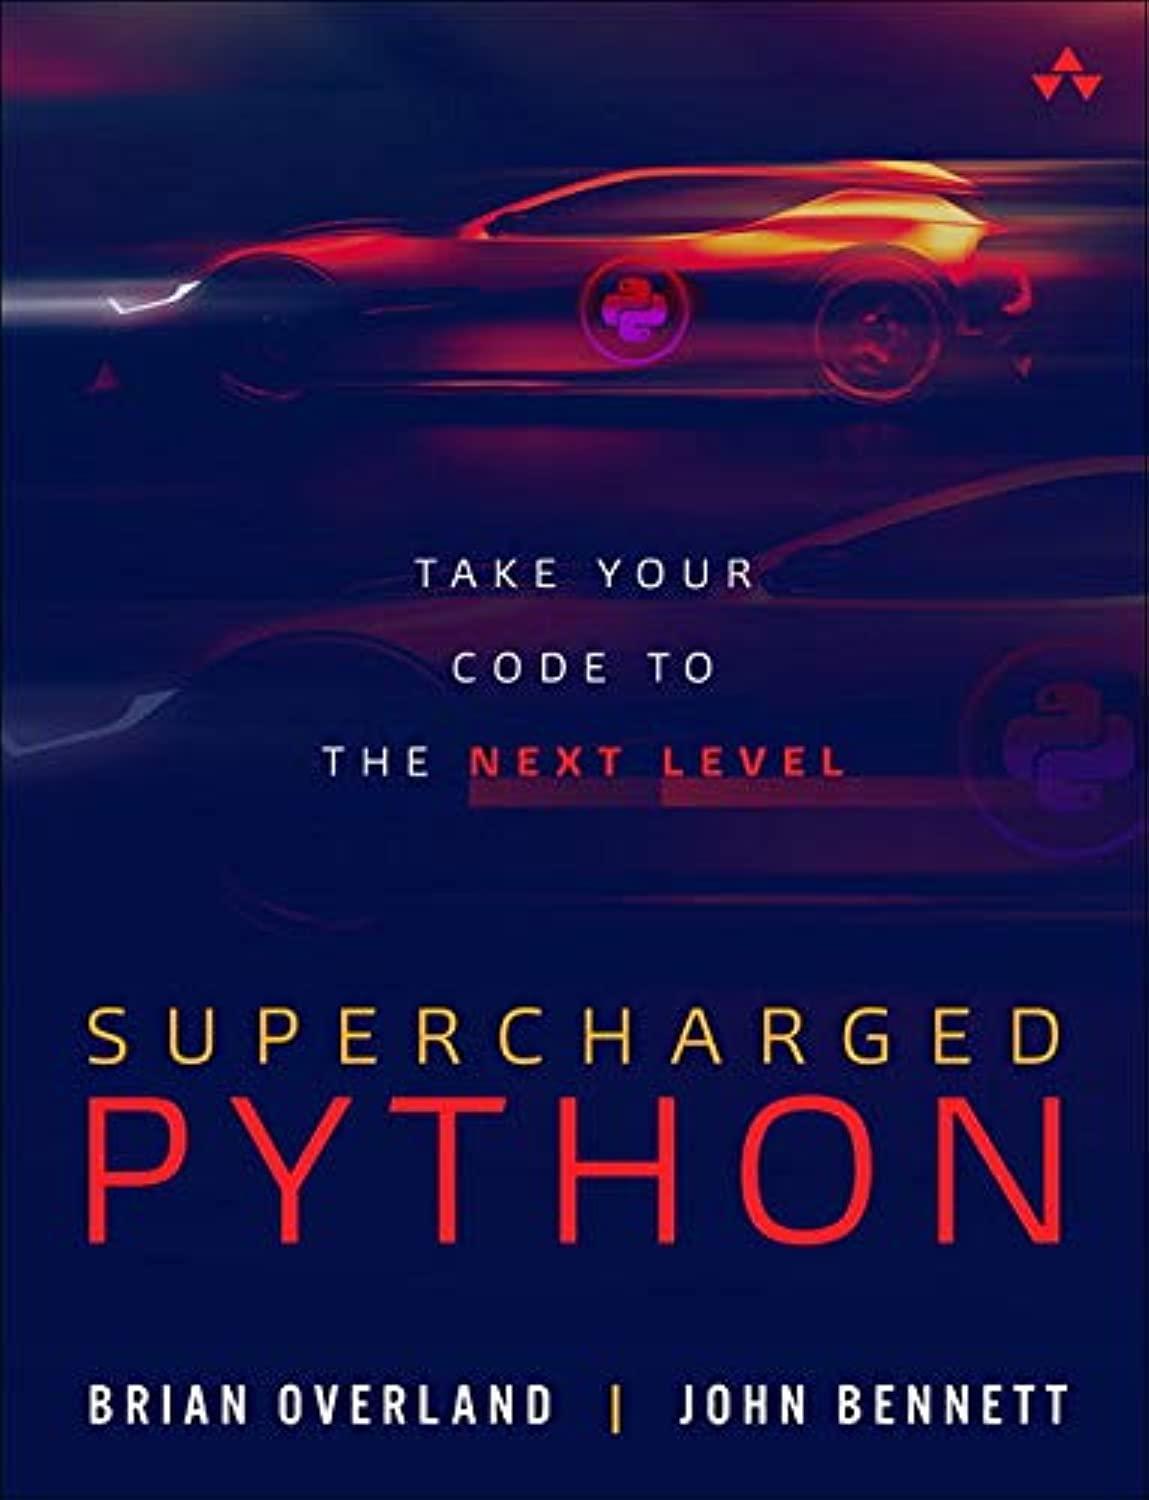 supercharged python take your code to the next level 1st edition brian overland, john bennett 0135159946,